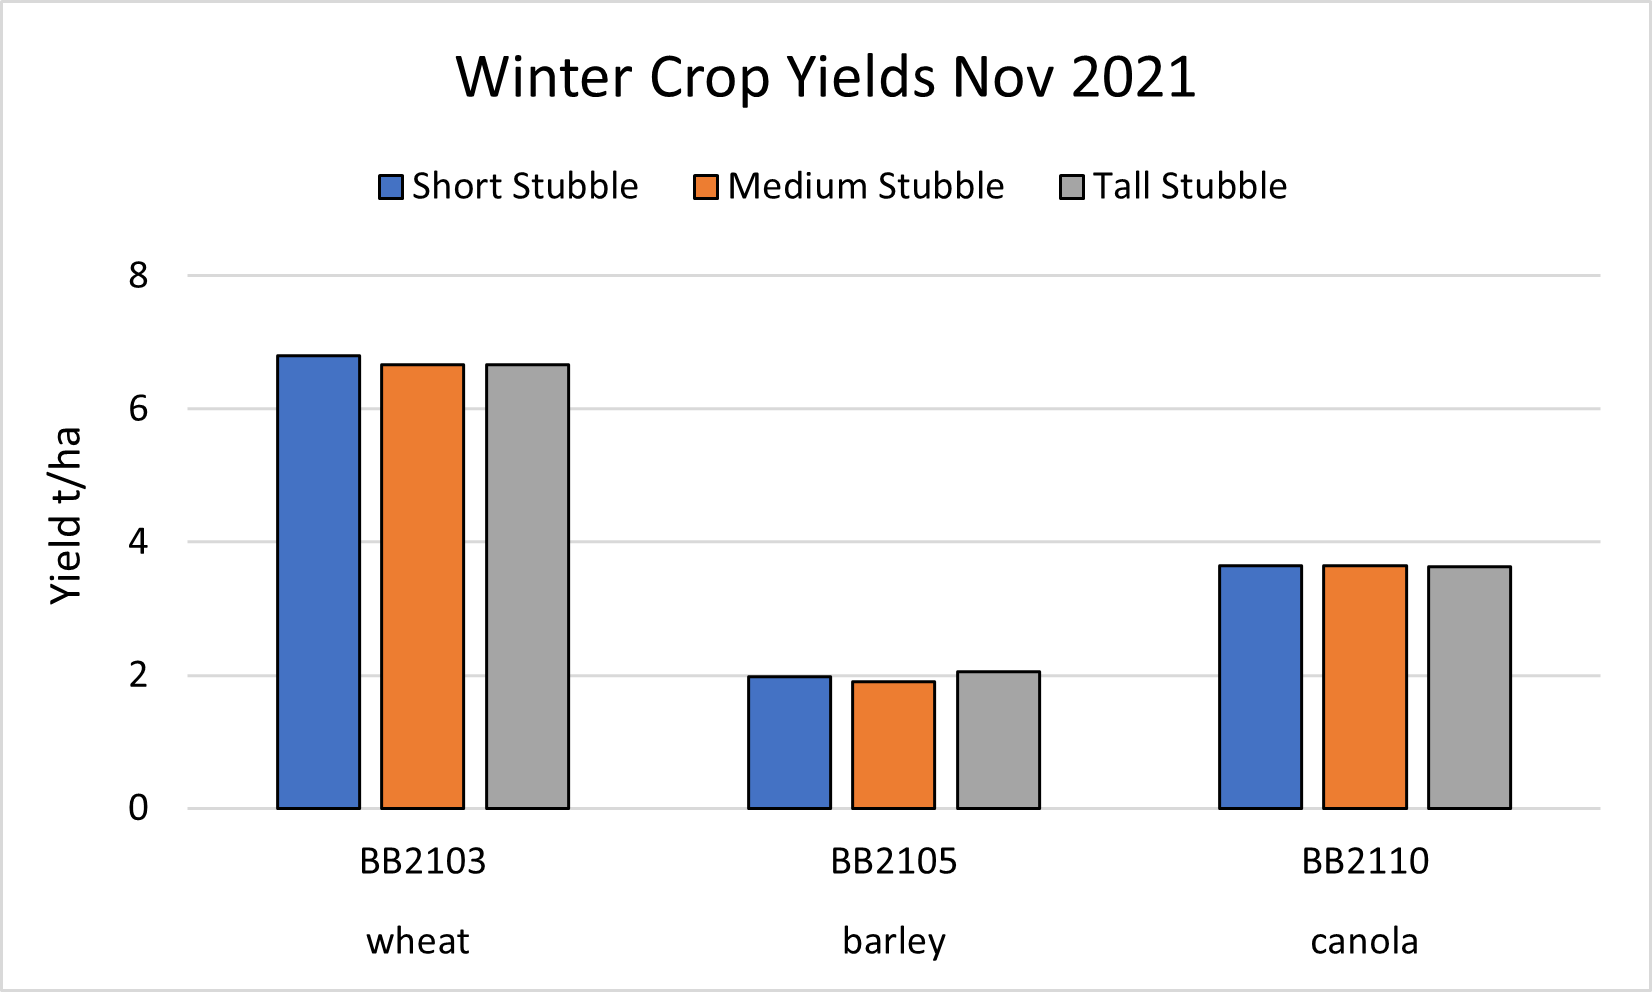 Column graph of Yield (t/ha) from winter crop trials in 2021.